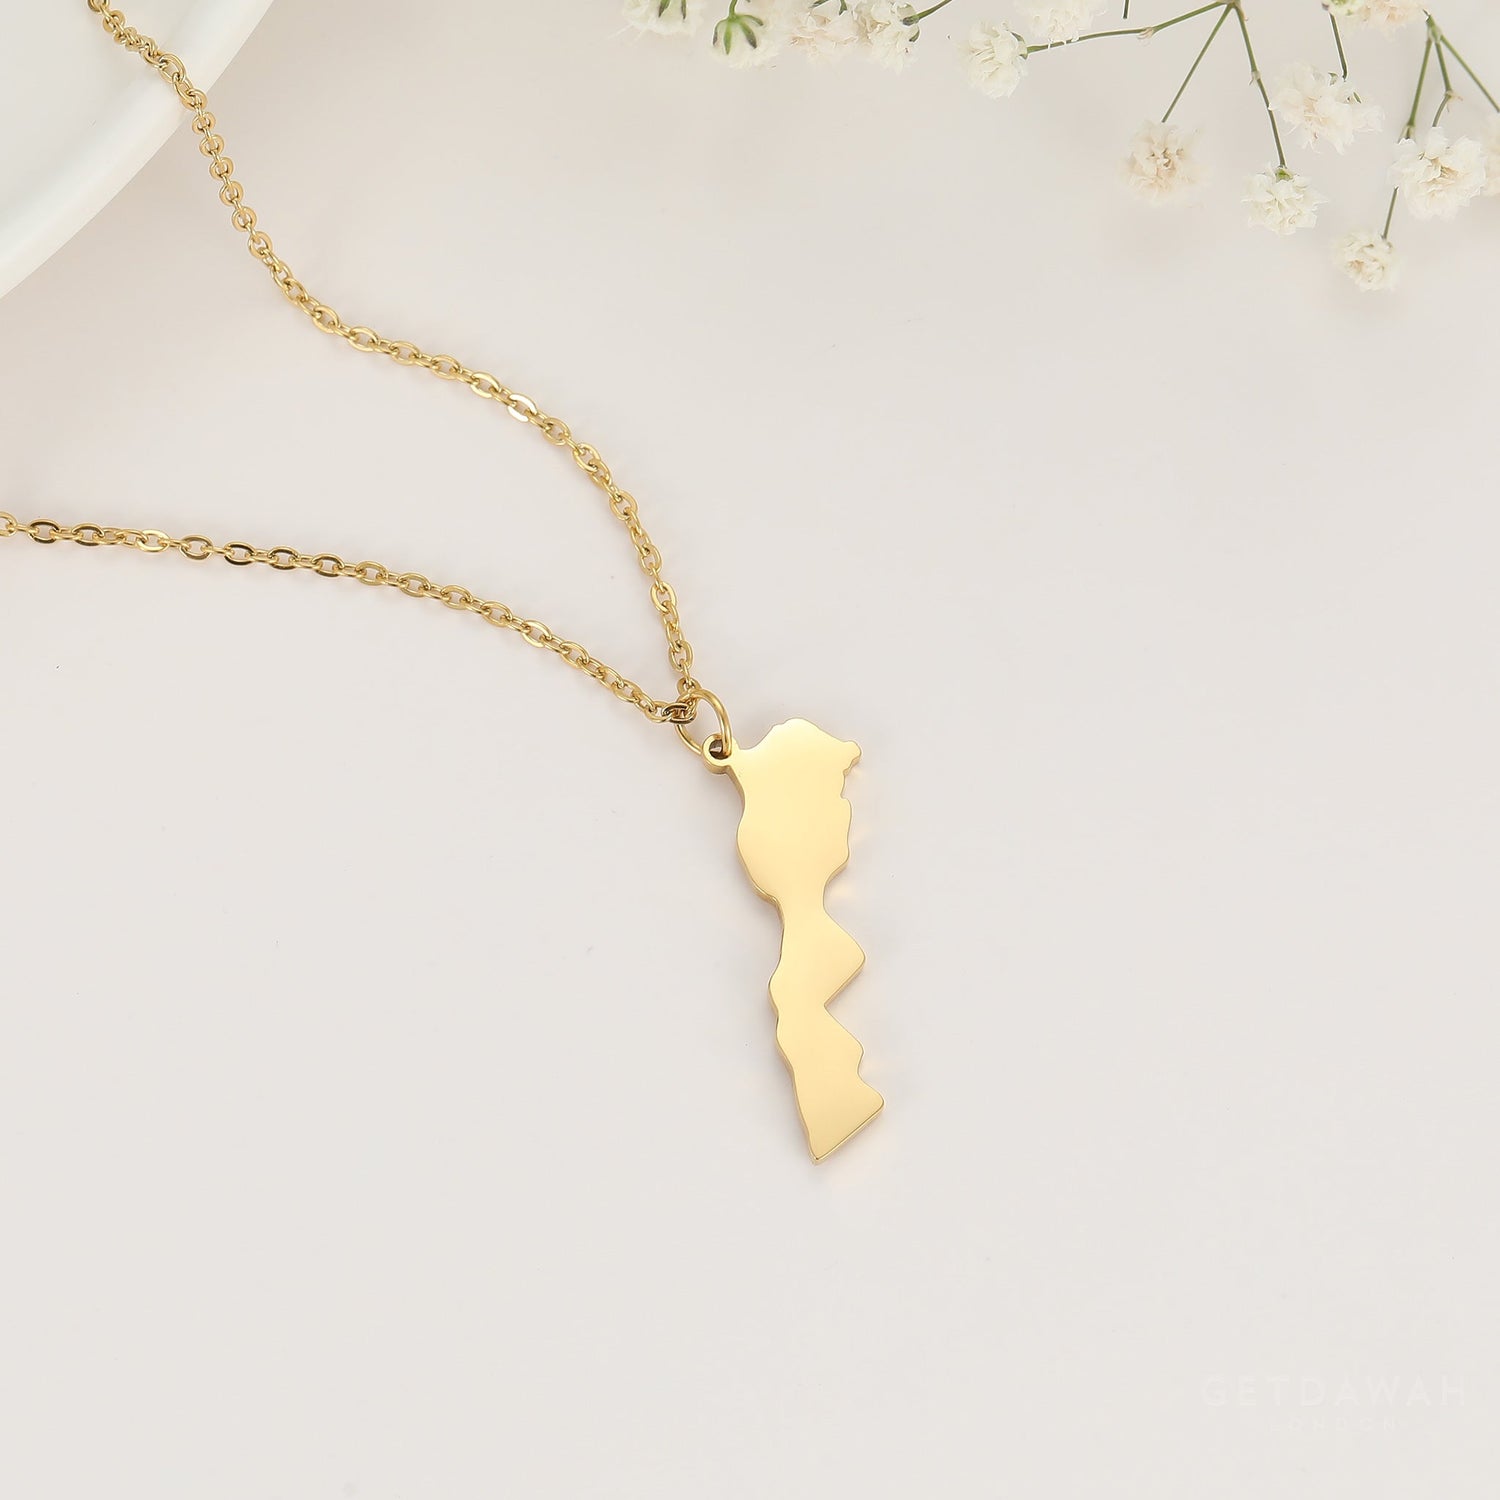 Country Map Necklace | Country Necklace | Getdawah